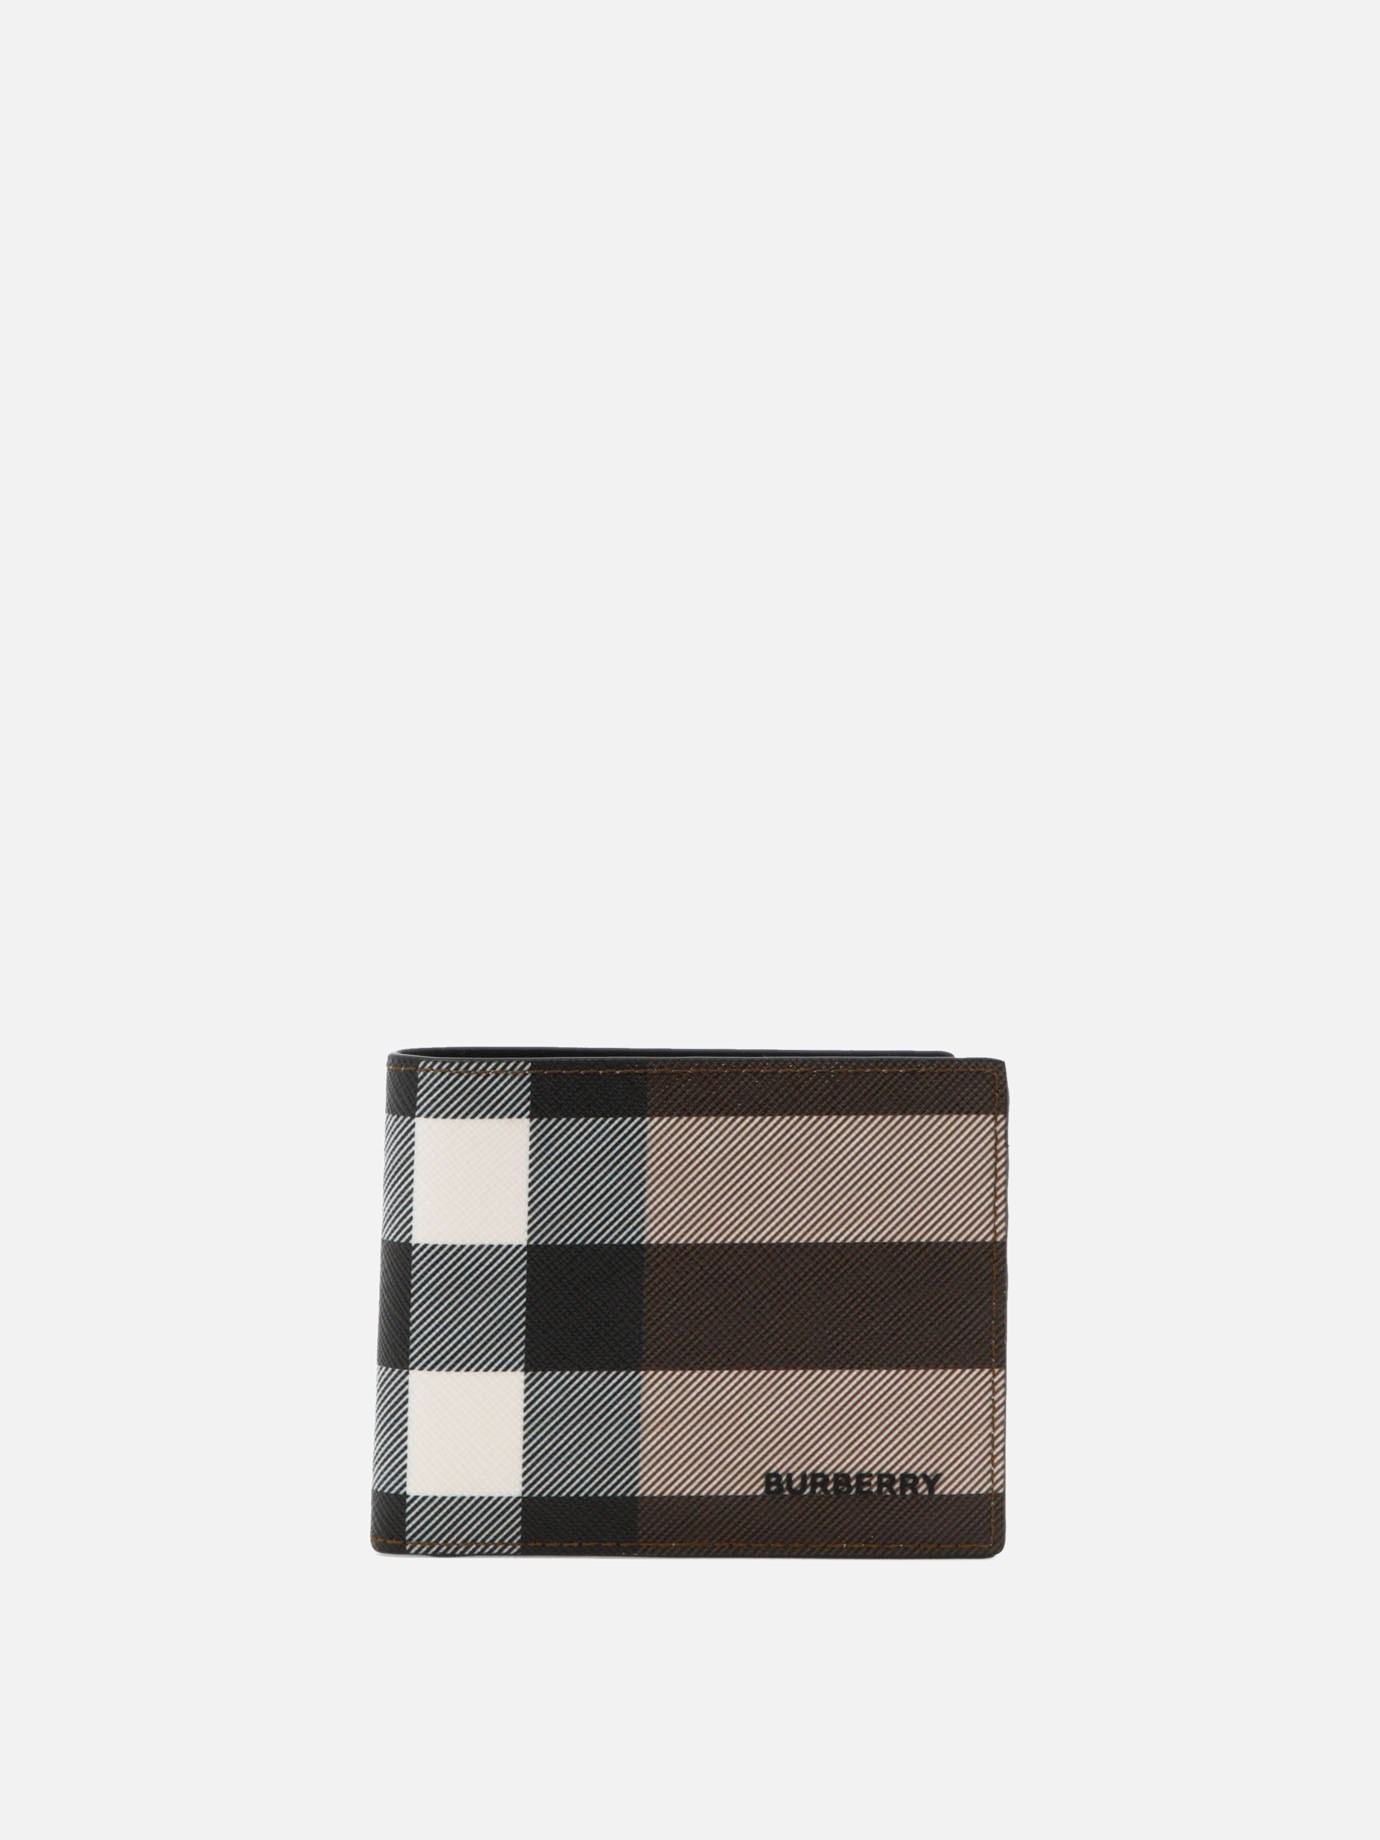  Hipfold  walletby Burberry - 2